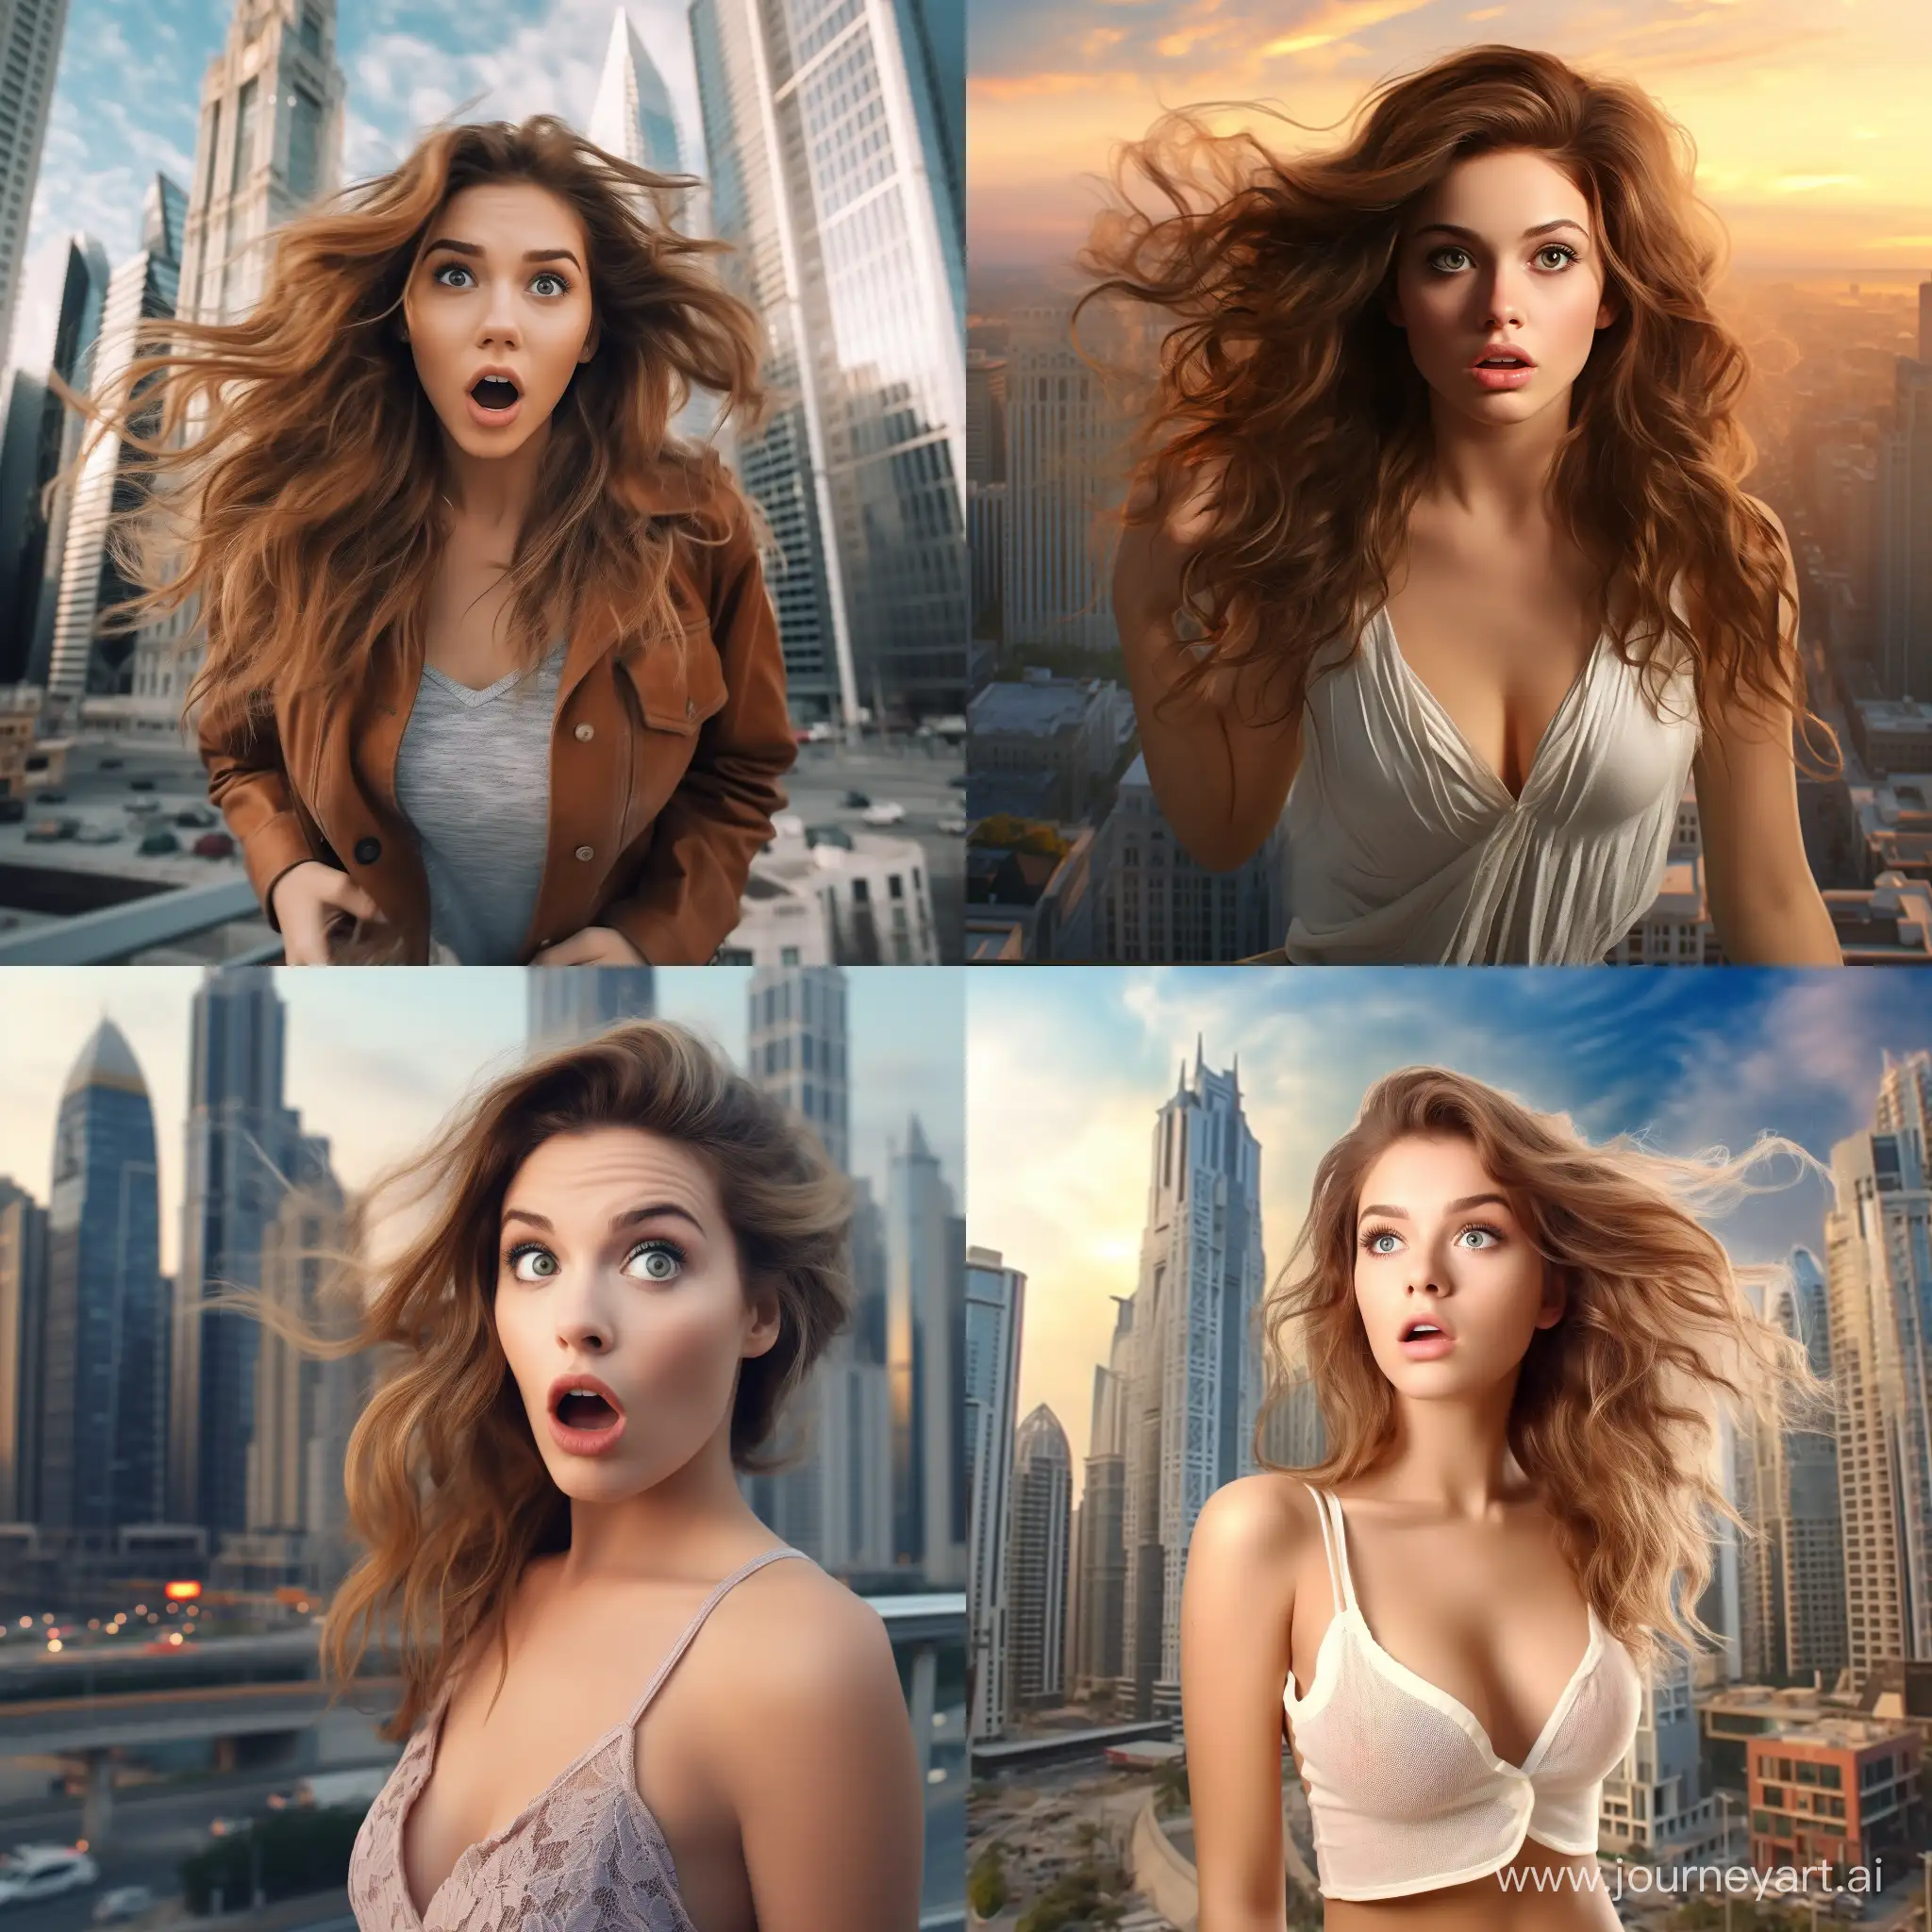 Surprised-Cityscape-Beauty-Astonished-Girl-amid-Urban-Skyscrapers